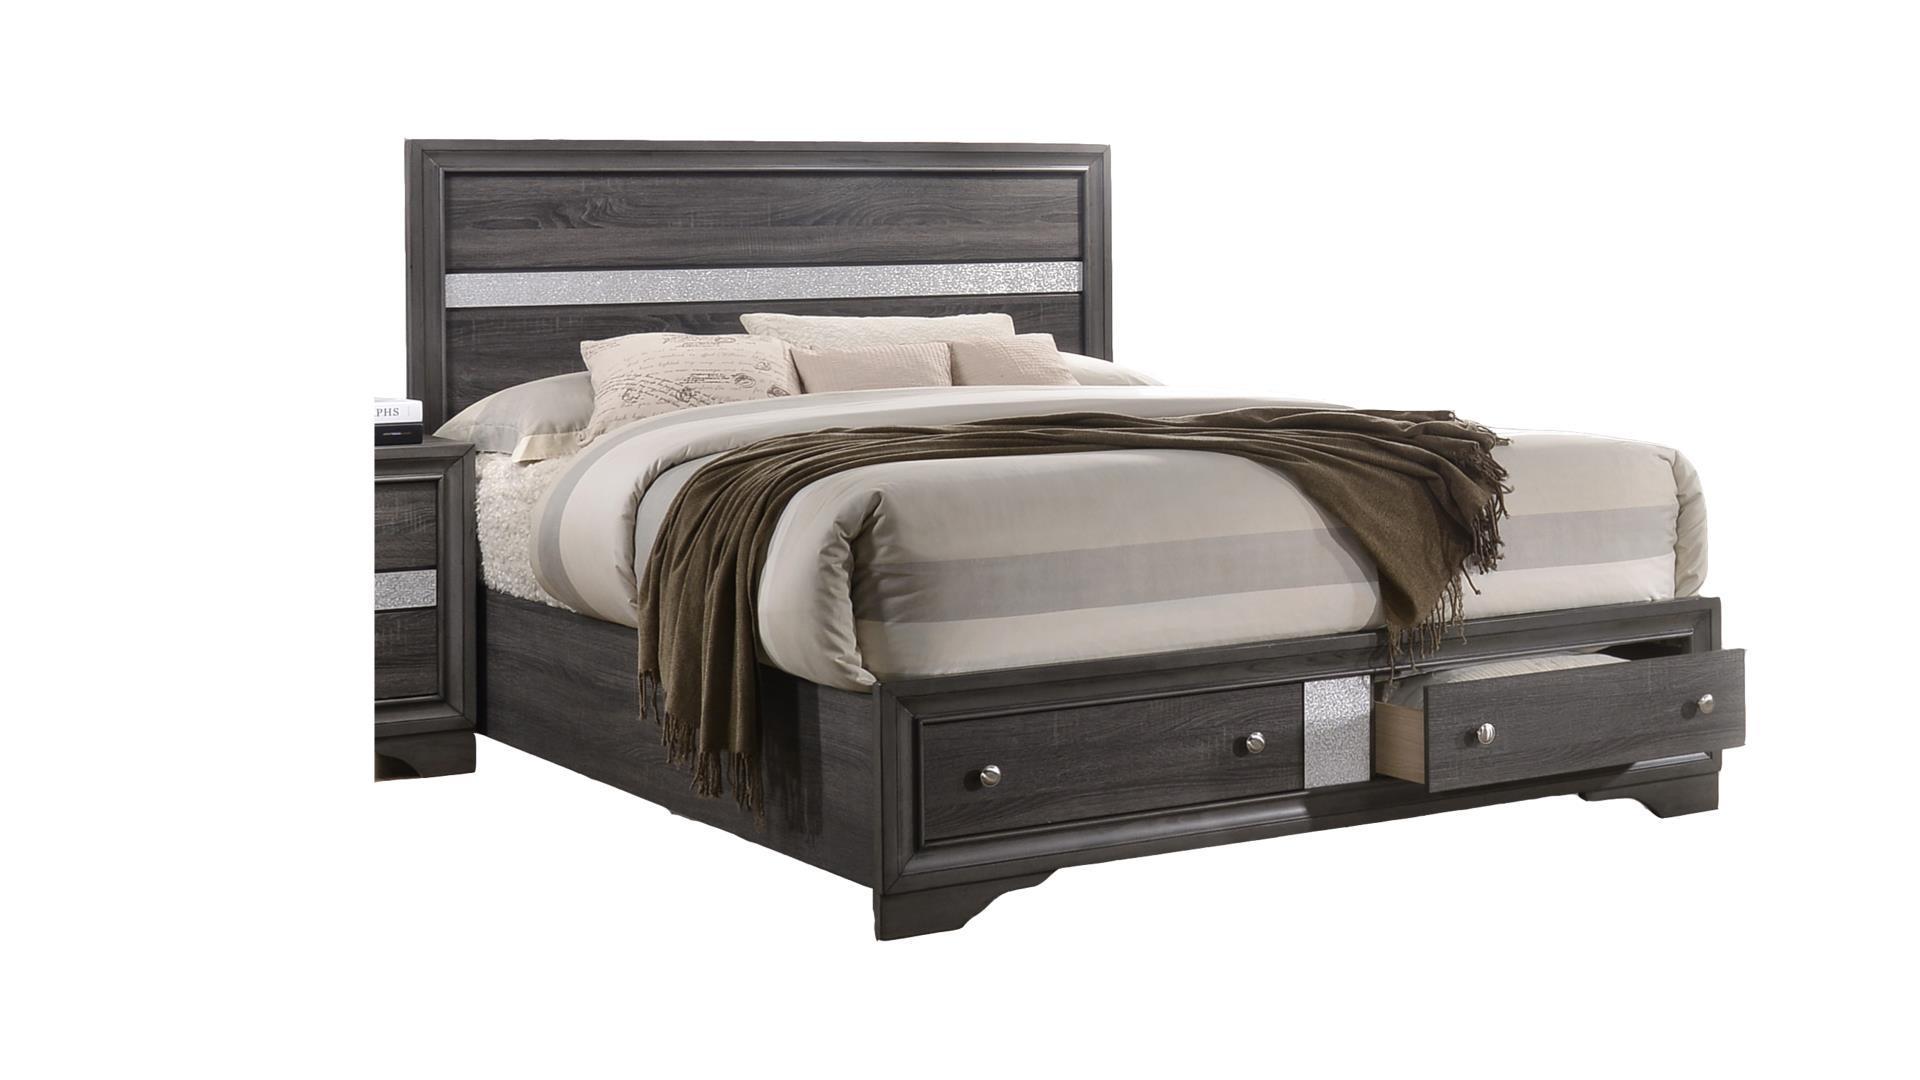 Contemporary, Modern Storage Bed MATRIX GHF-808857710604 in Gray 